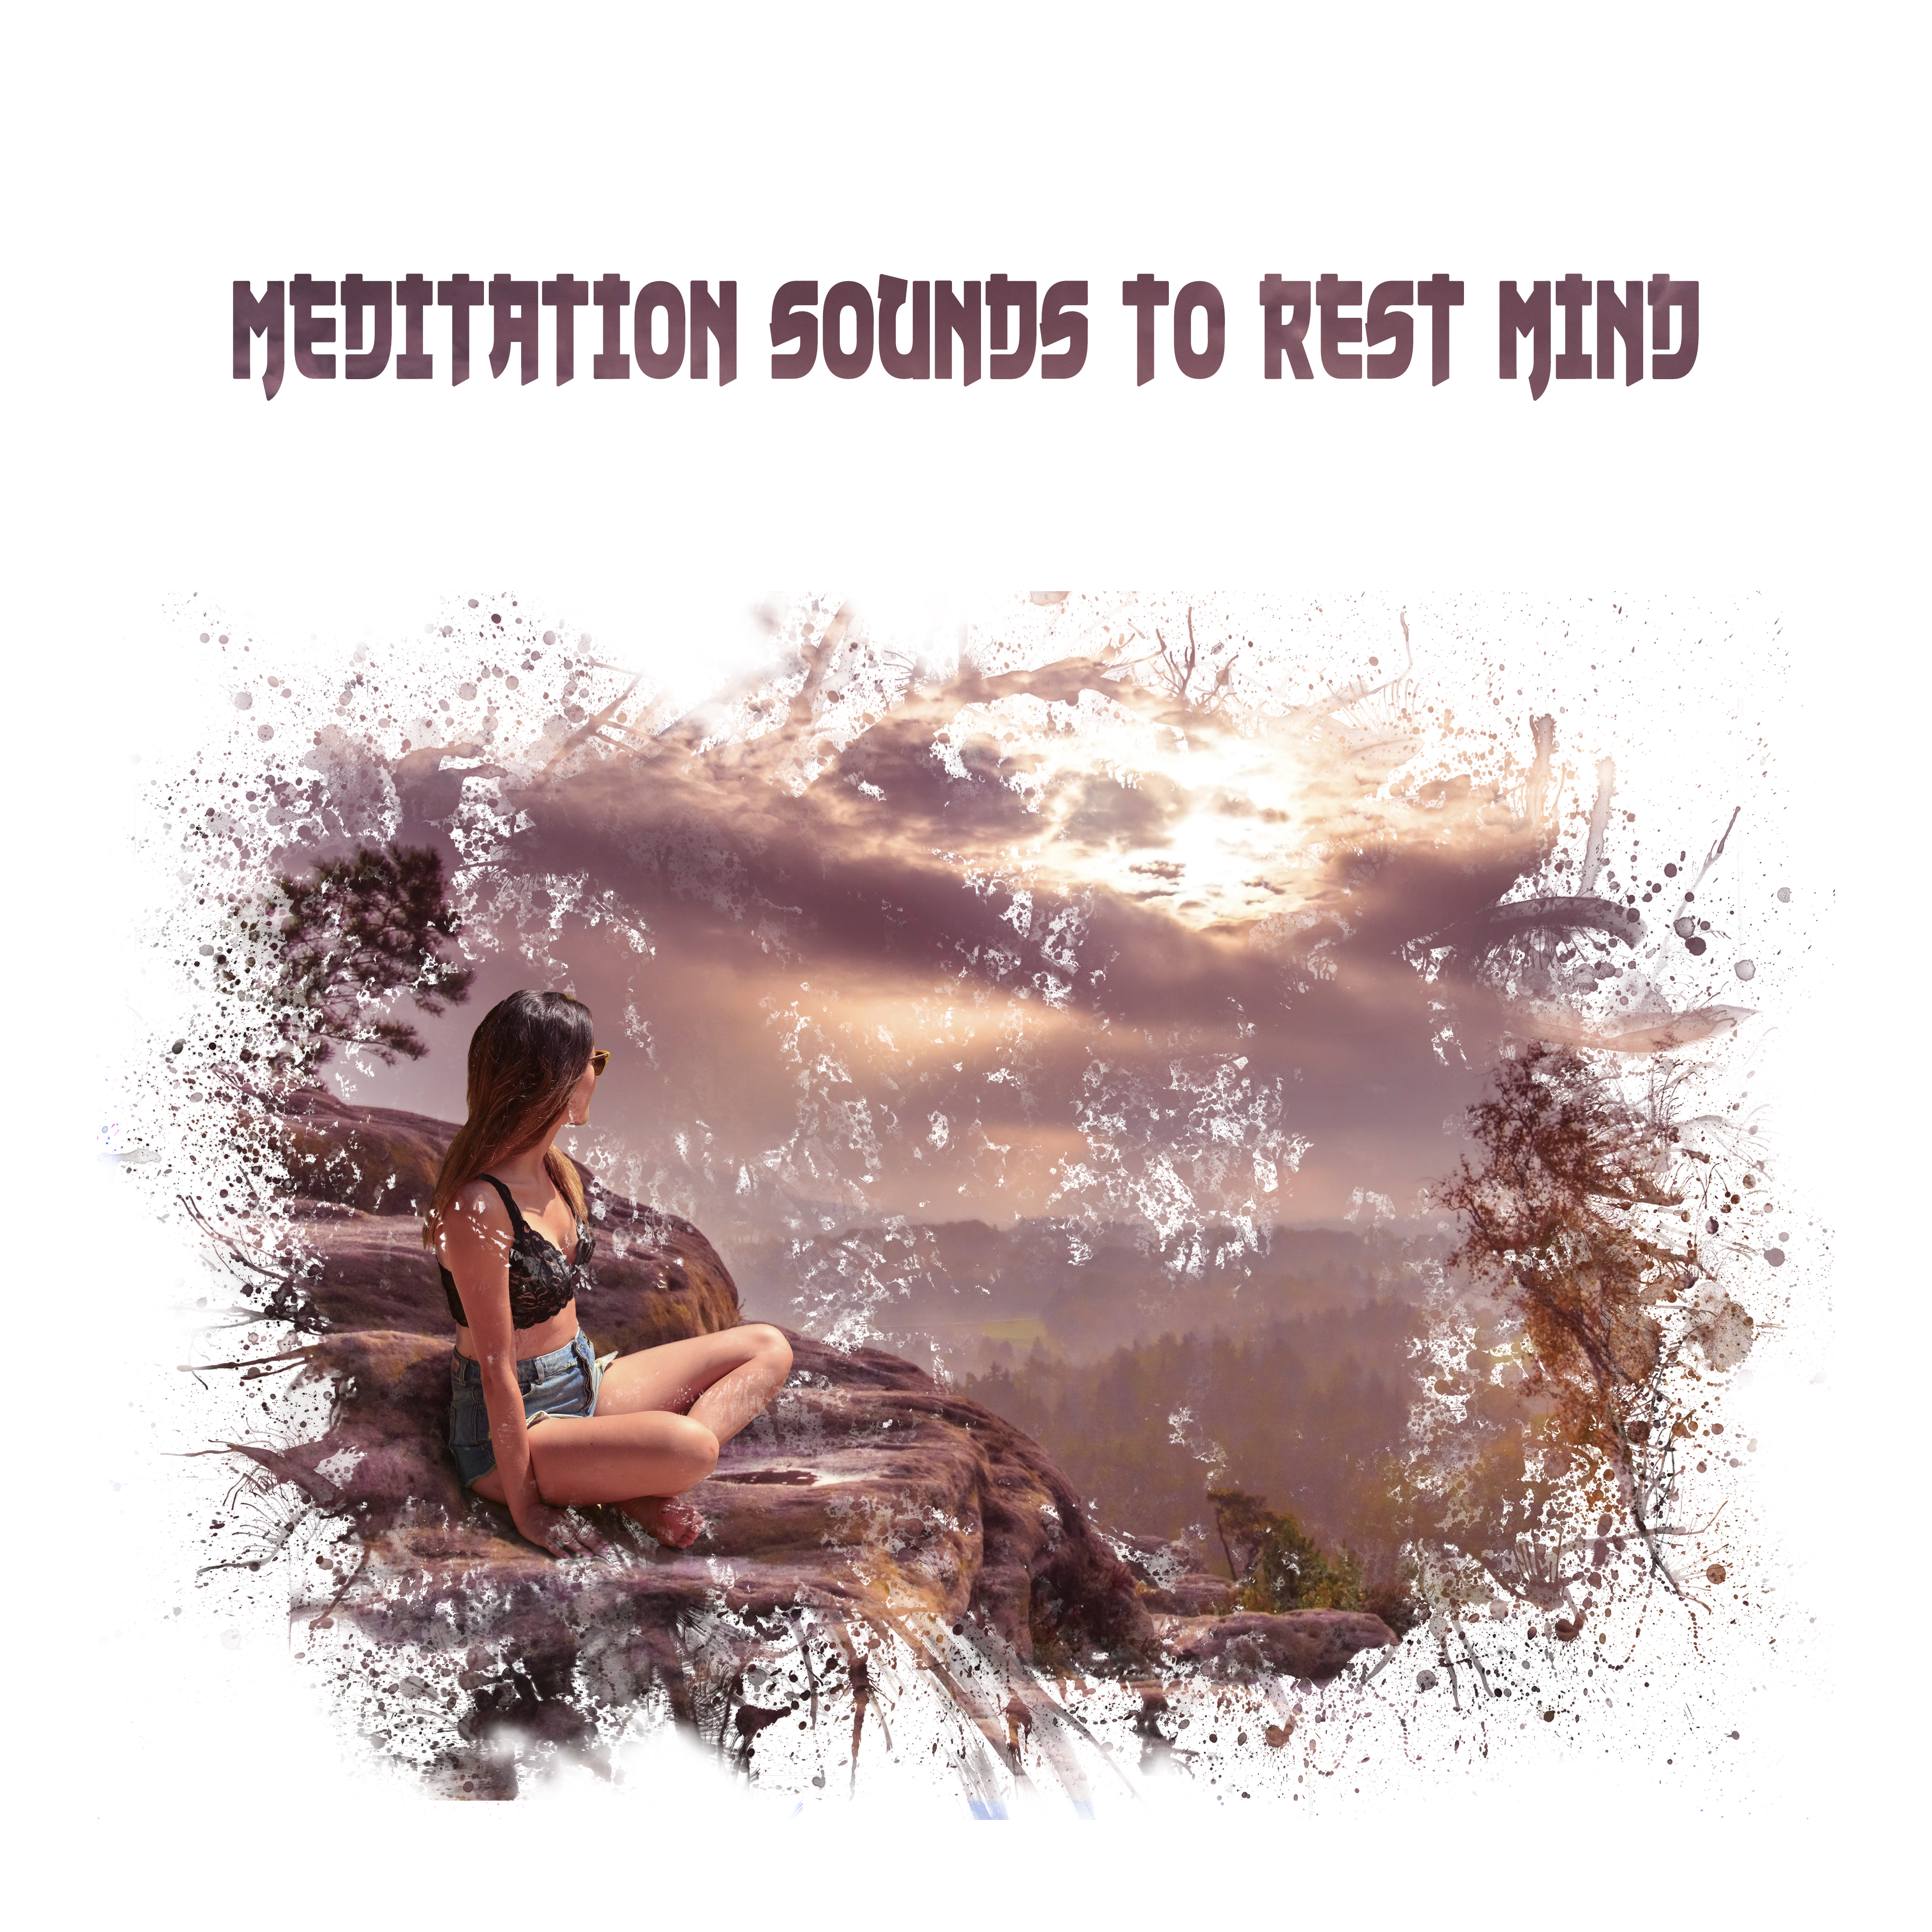 Meditation Sounds to Rest Mind  Calming Mind Sounds, Meditation  Relaxation, Easy Listening, Stress Relief